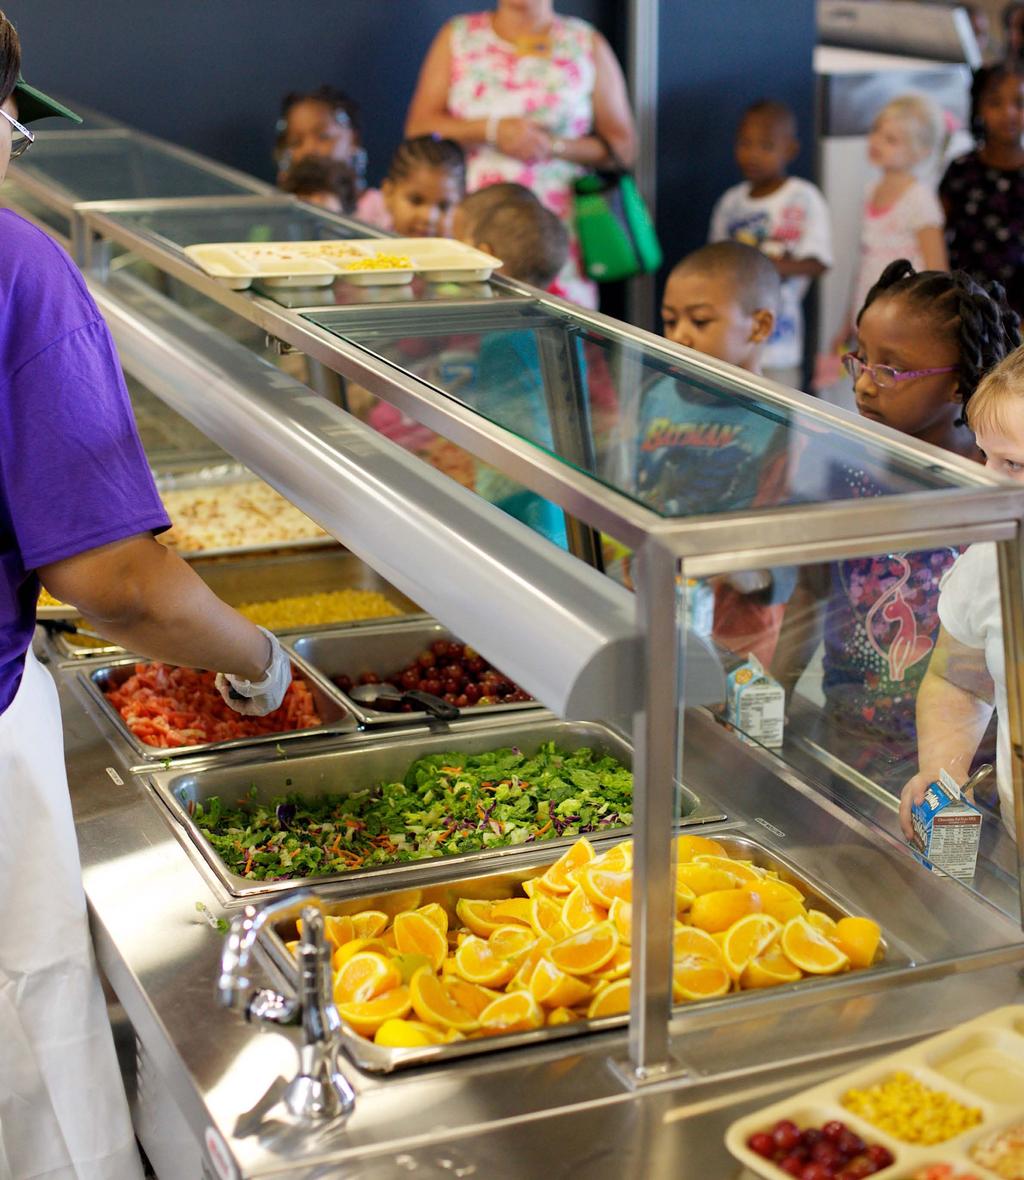 FOOD LITERACY CREATING FOODSMART KIDS Creating school food environments that facilitate healthy eating among children is a recommended national strategy to help prevent and reduce childhood obesity.